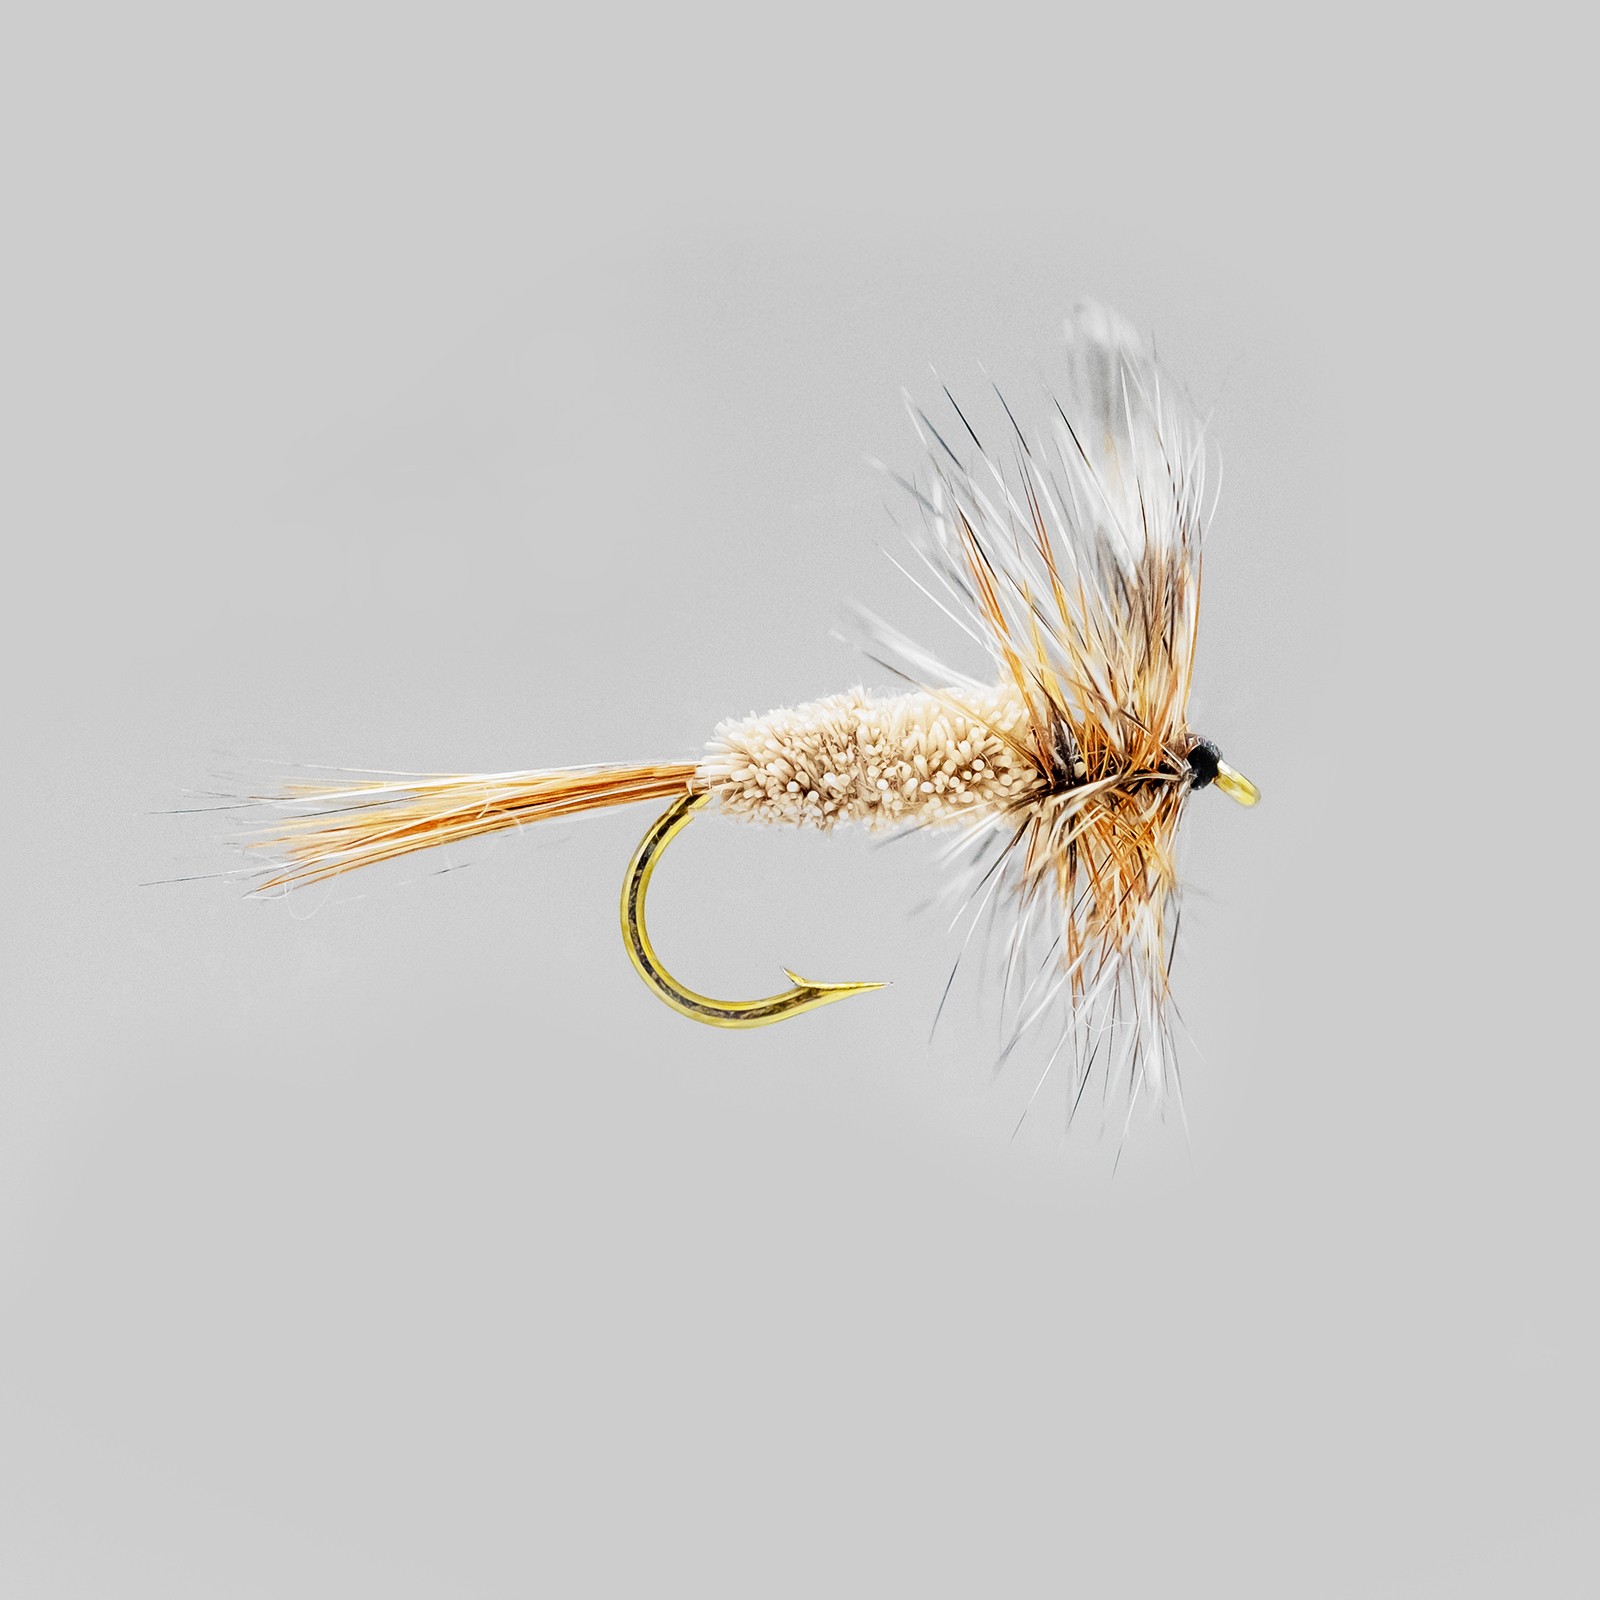 Trout Fly Fishing, Trout Flies, Dries